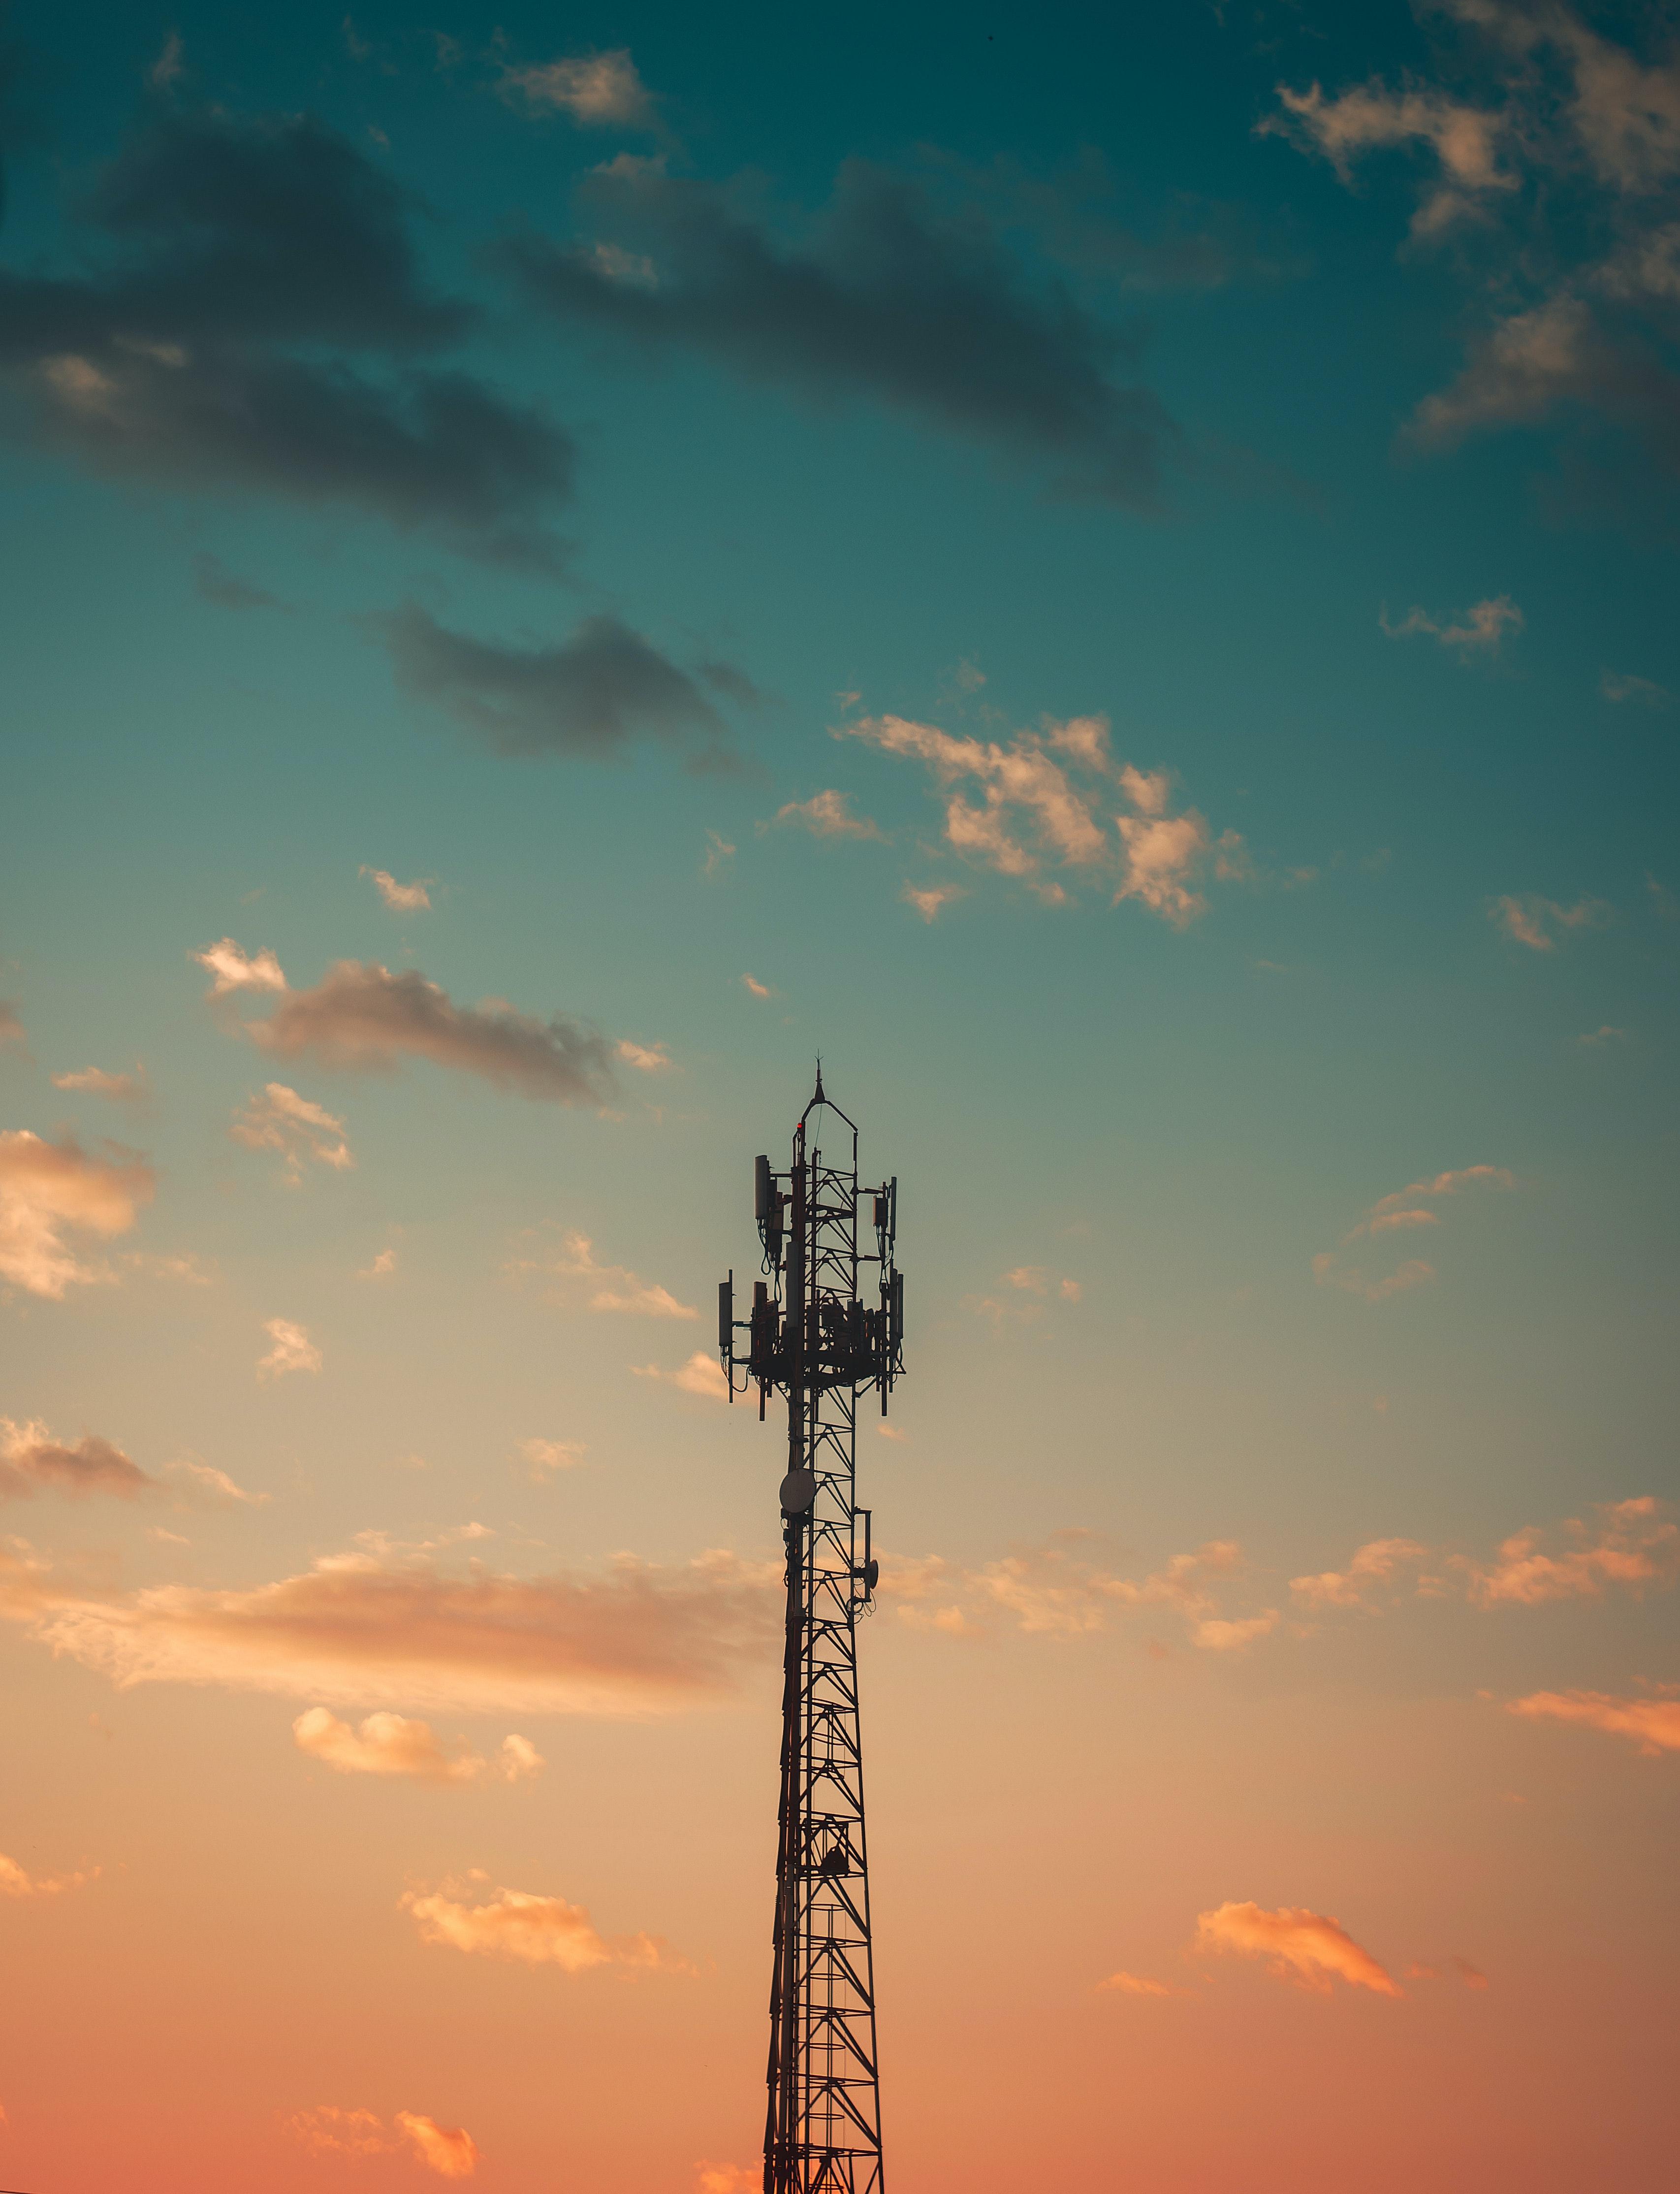 Which cell phone company has the most towers? 